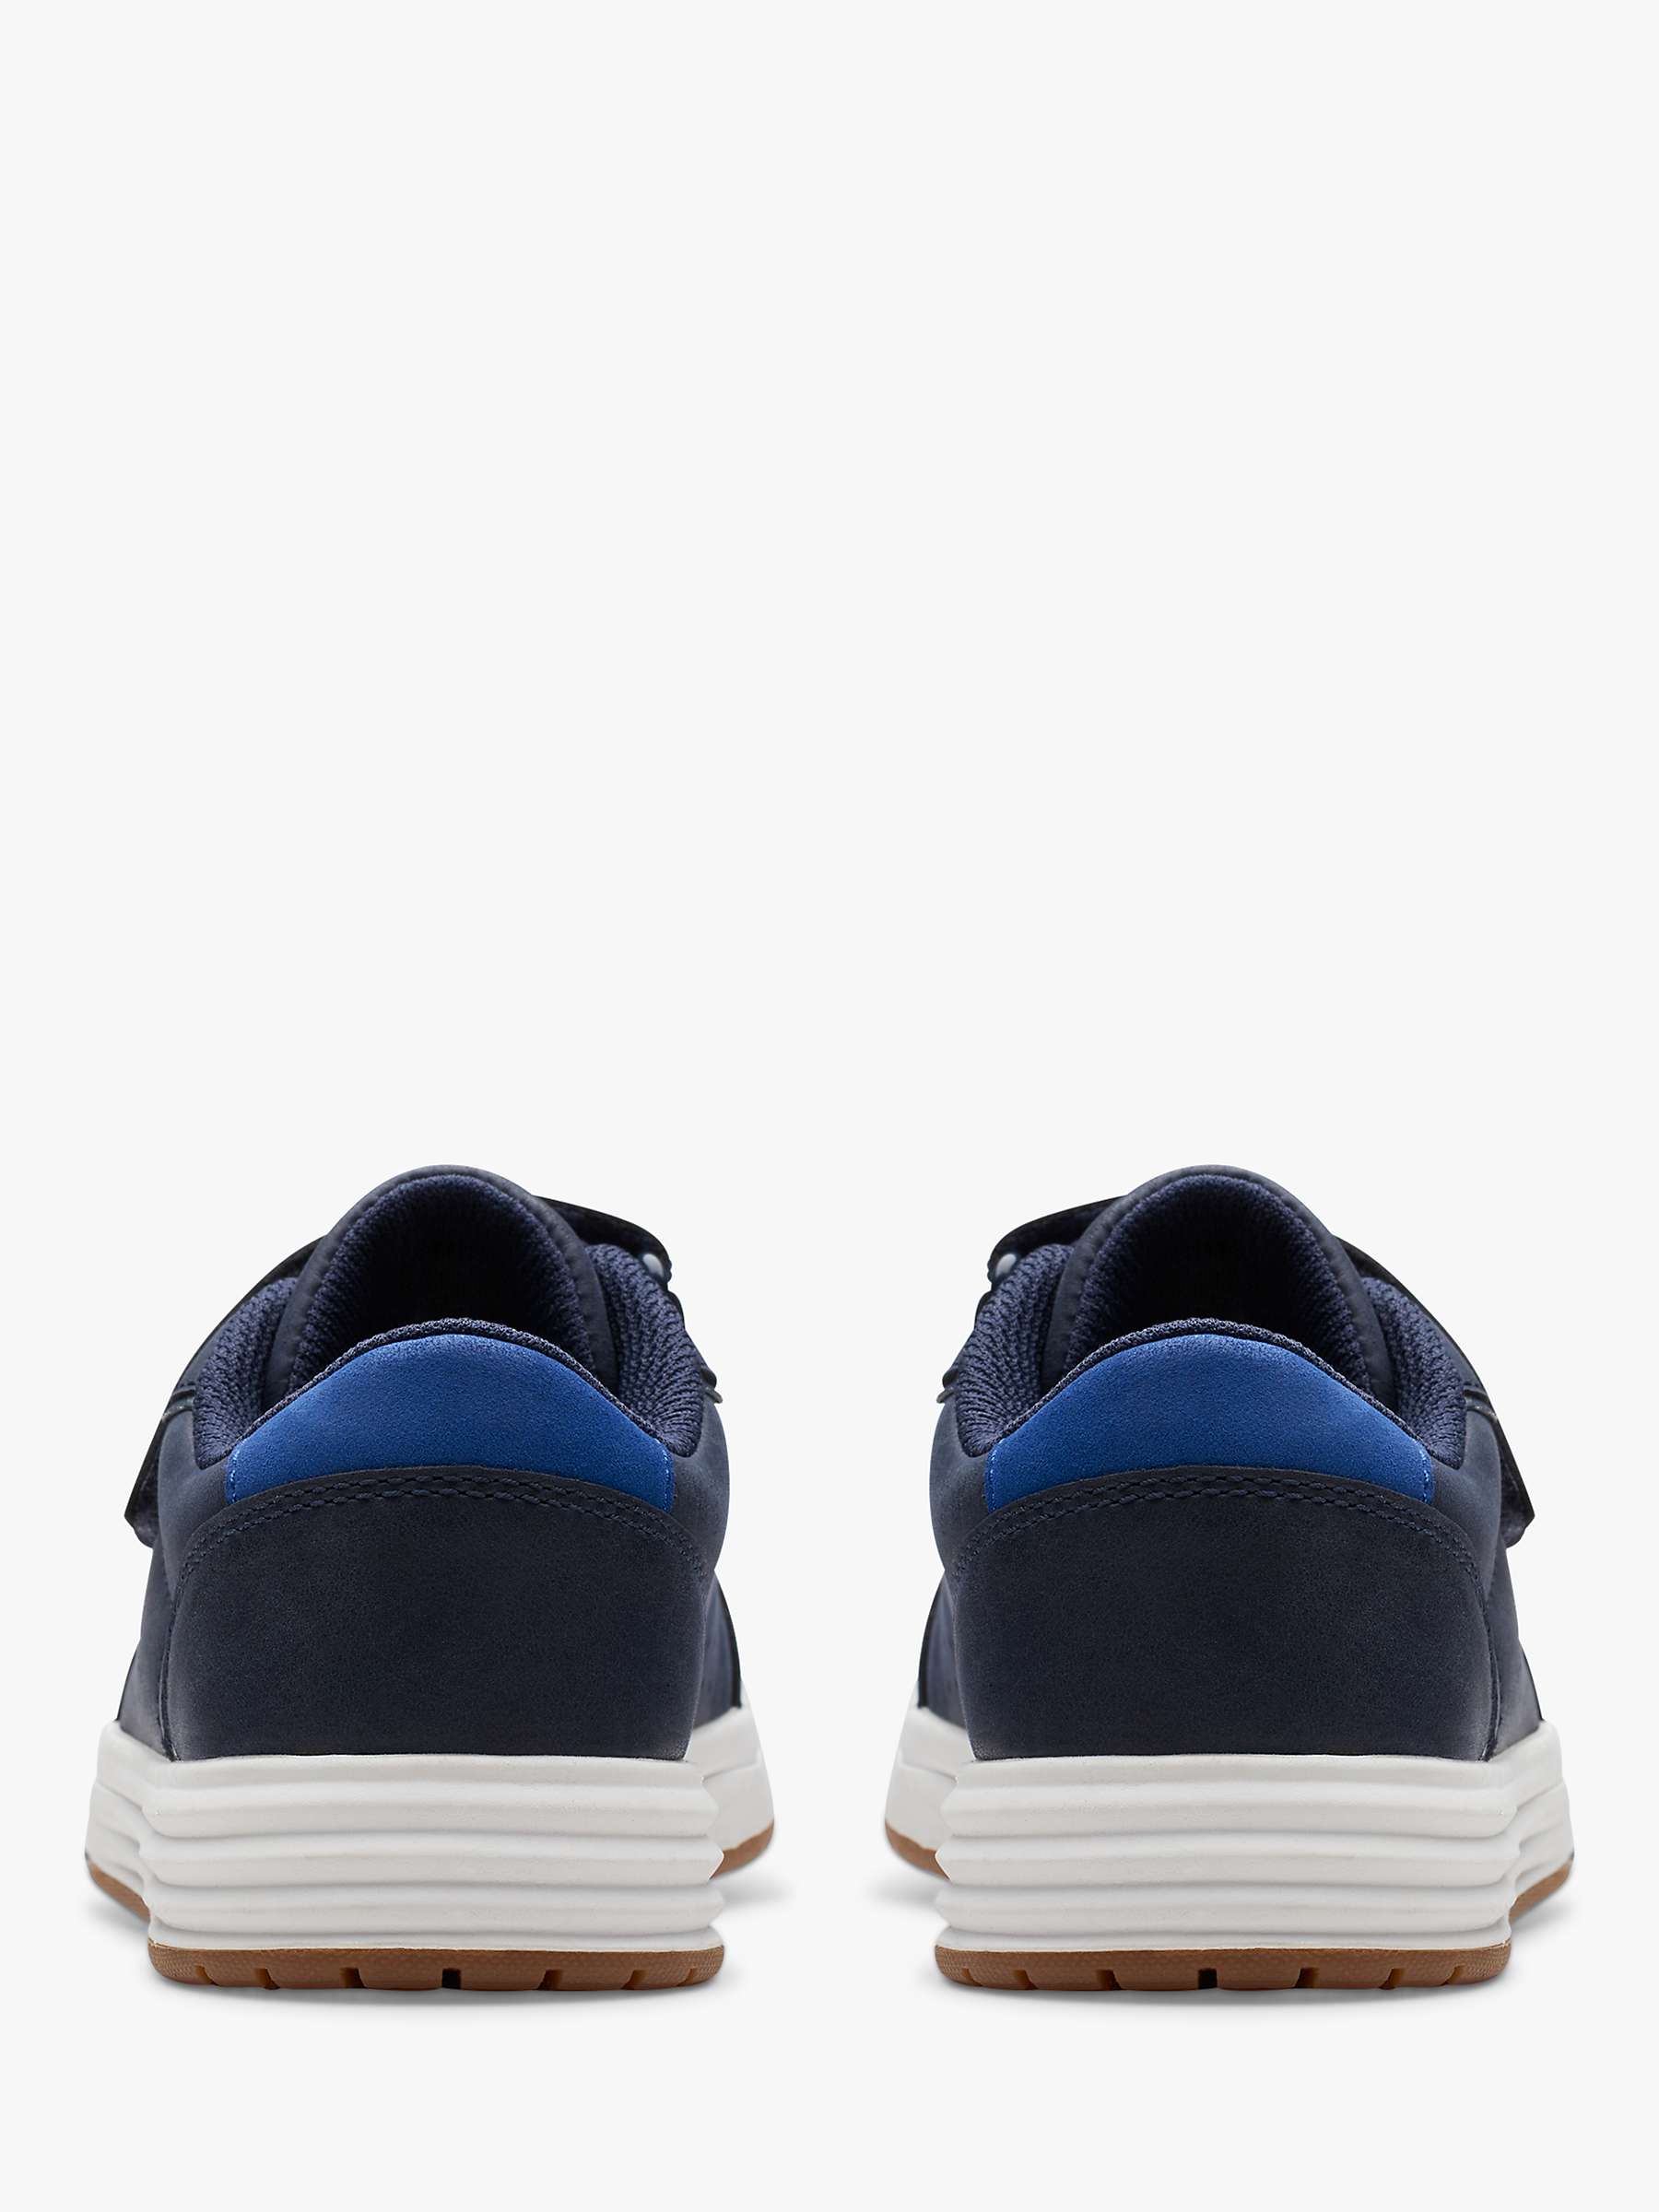 Buy Clarks Kids' Urban Solo Leather Riptape Trainers Online at johnlewis.com